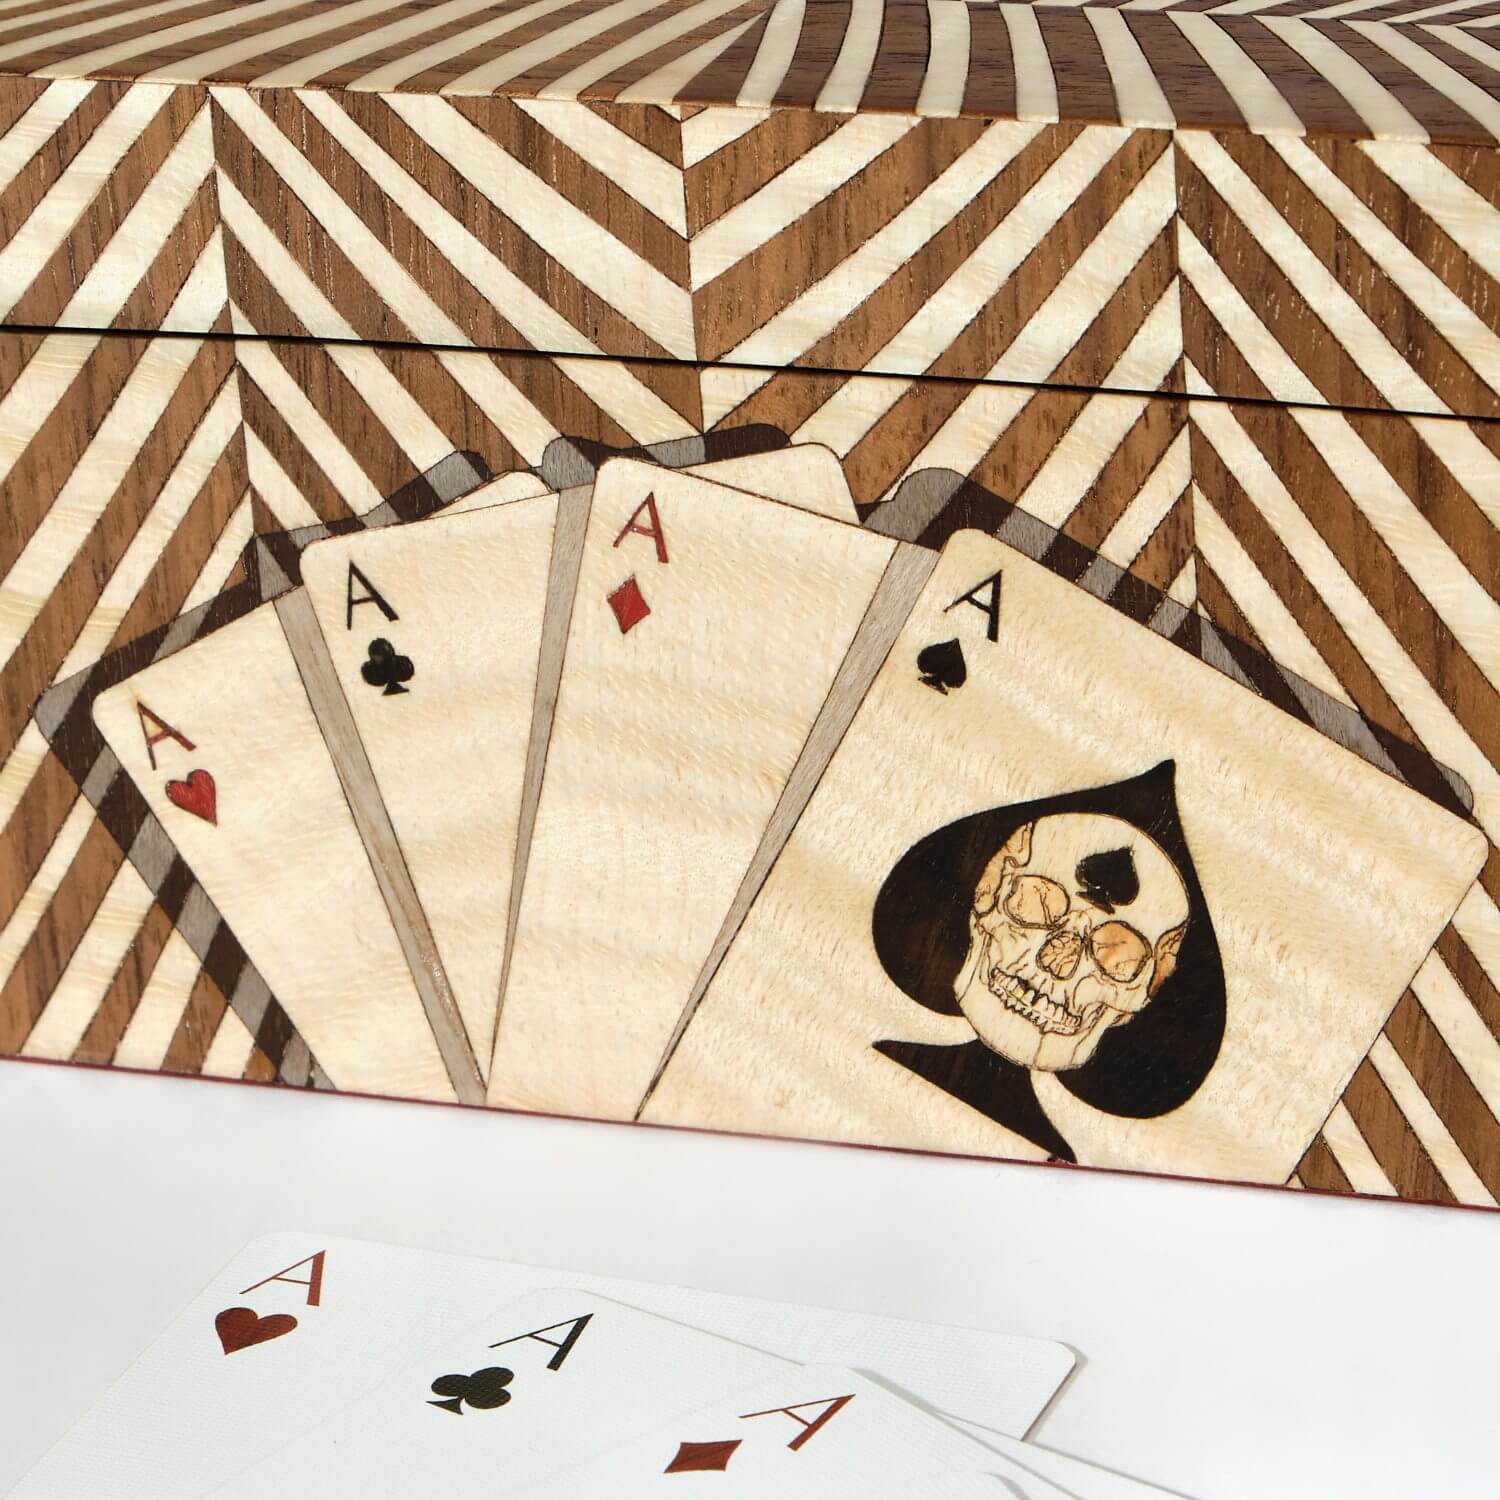 A trompe l’oeil technique created in wood marquetry creating the illusion of shadow behind marquetry playing cards on the Double Cards Box side